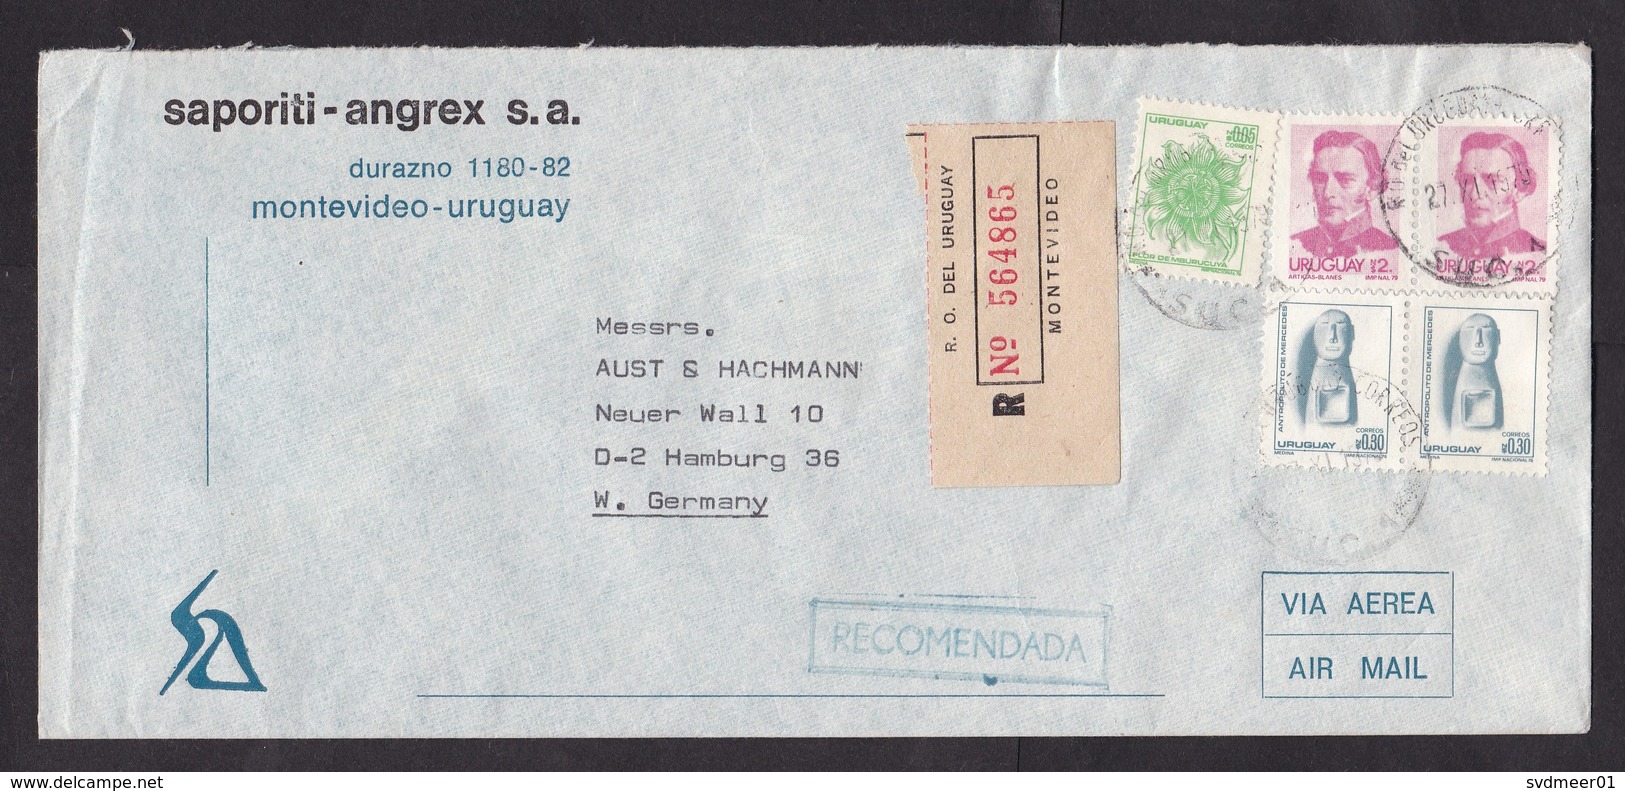 Uruguay: Registered Airmail Cover To Germany, 1979, 5 Stamps, Flower, Scultpture, Heritage, R-label (traces Of Use) - Uruguay